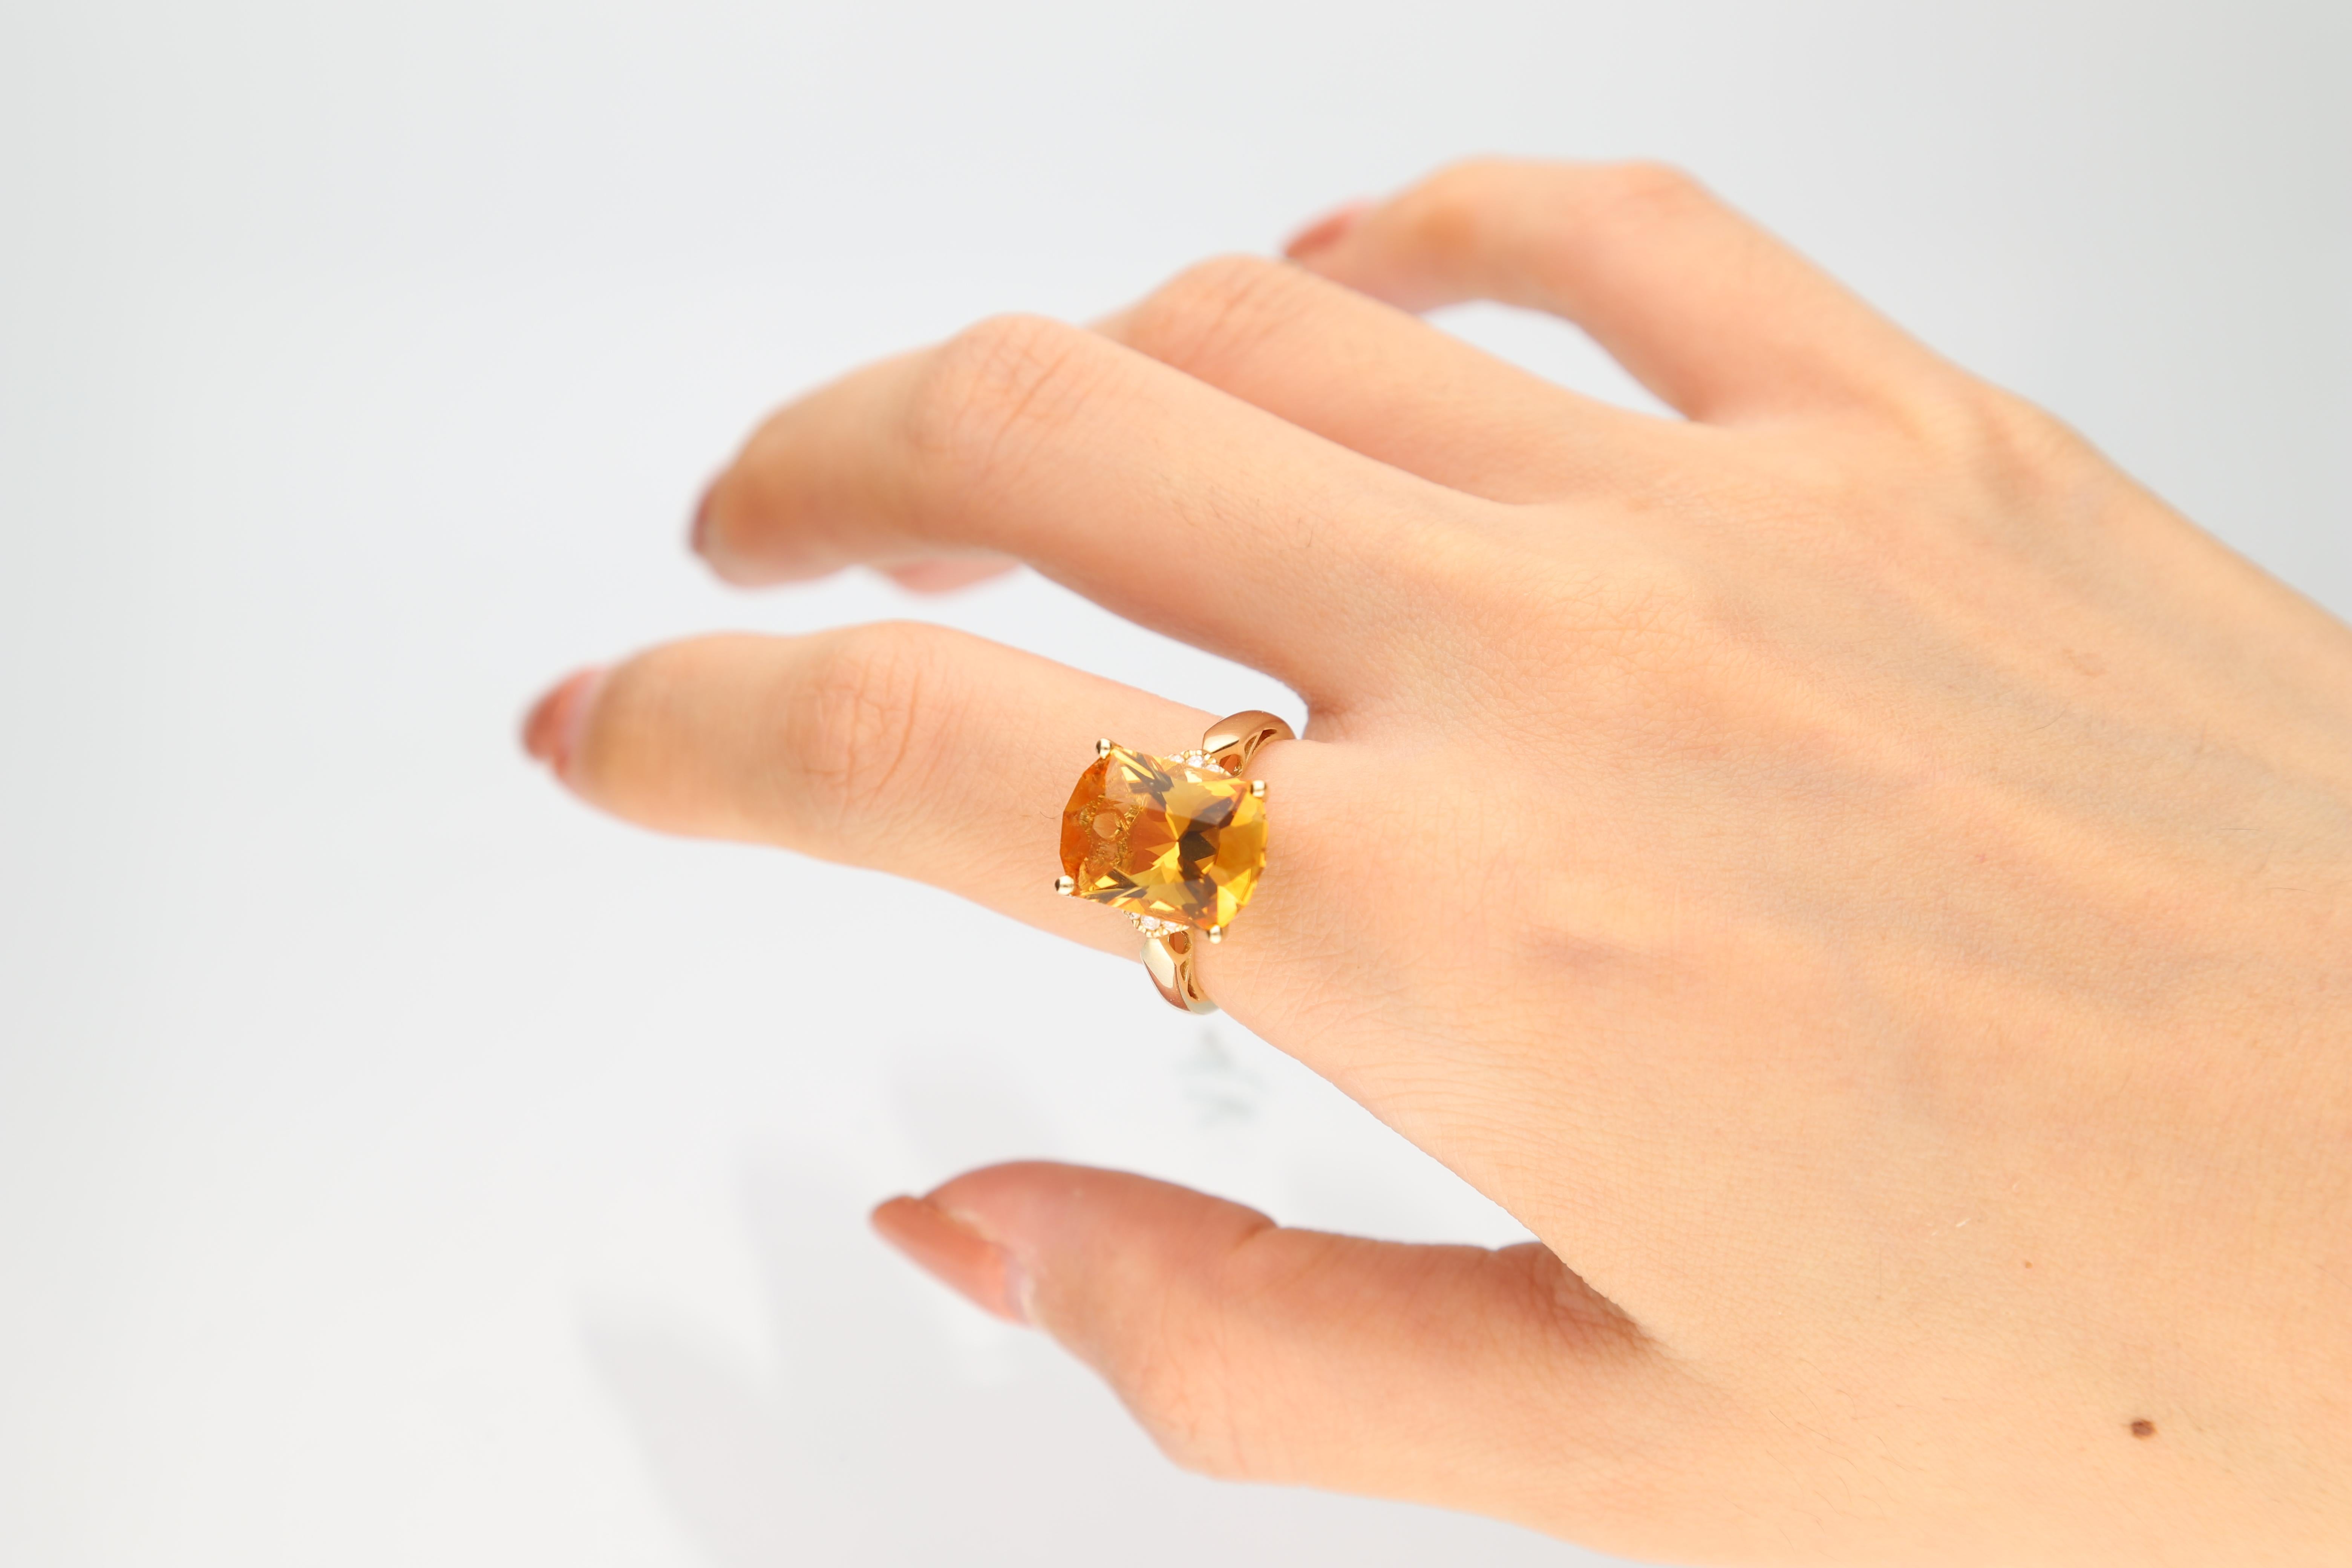 This beautiful Citrine Ring is crafted in 14-karat Yellow gold and features a 5.56 carat 1 Pc Citrine, 6 Pcs Round White Diamonds in GH- I1 quality with 0.05 Ct in a prong-setting. This Ring comes in sizes 6 to 9, and it is a perfect gift either for